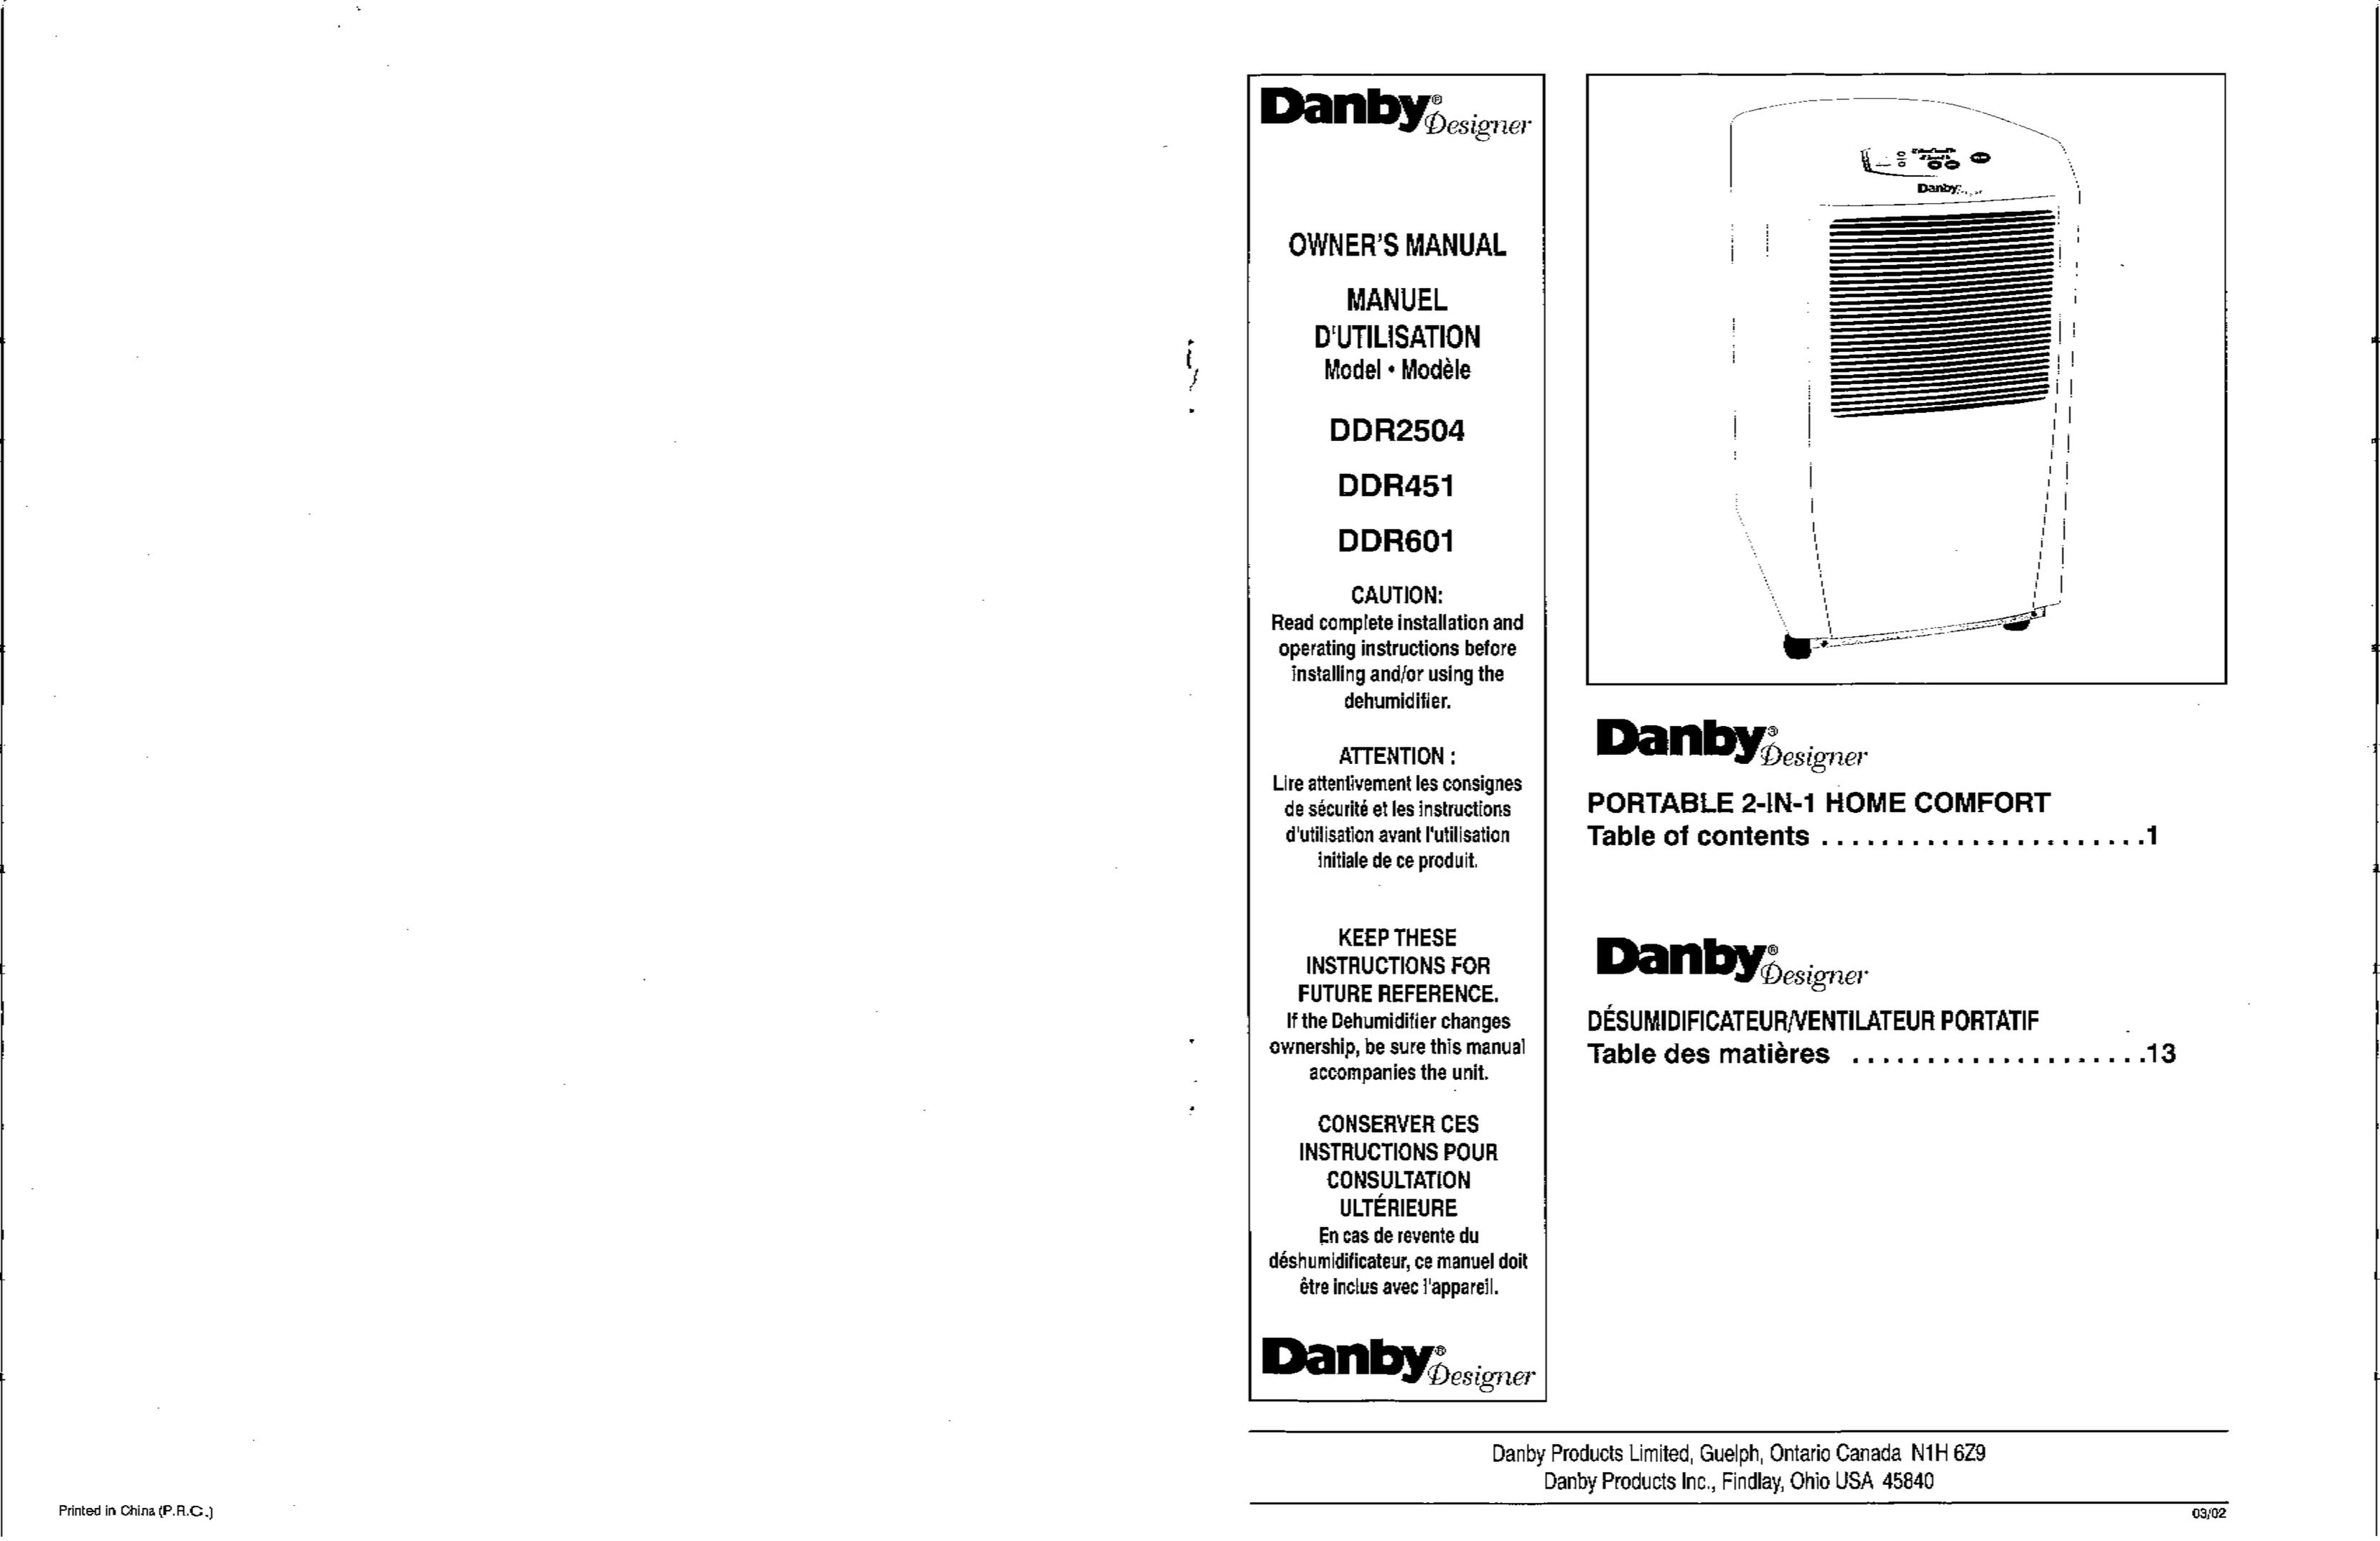 Danby DDR601 Air Conditioner User Manual